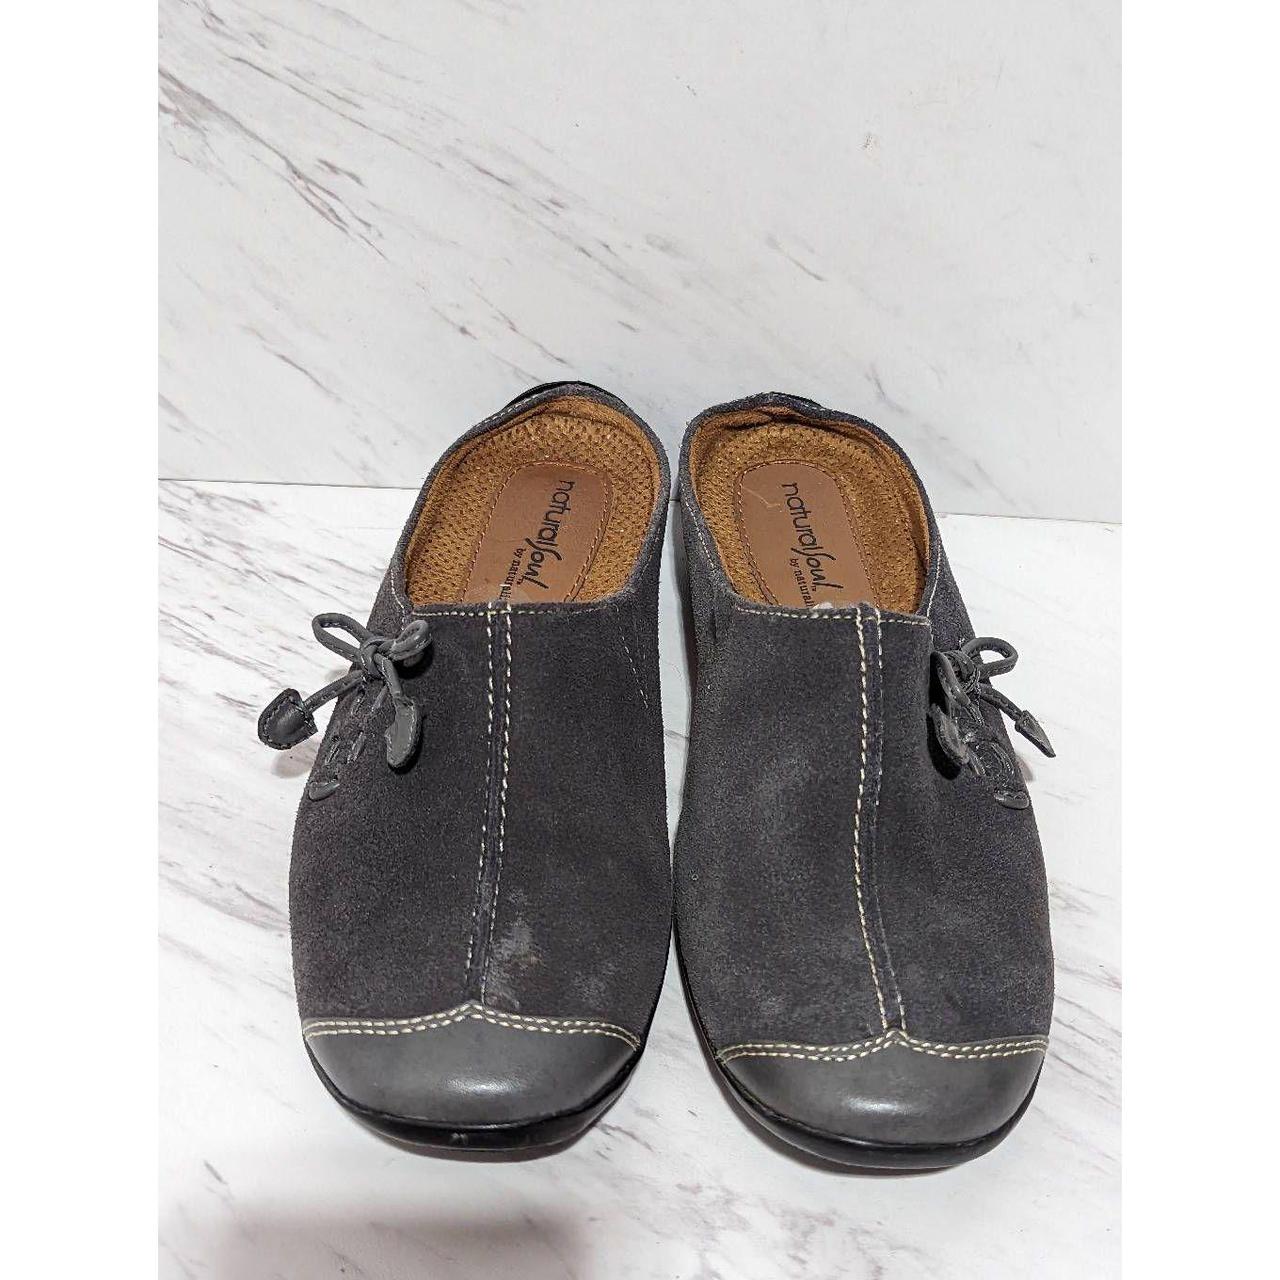  Natural Soul Shoes - Women's Loafers & Slip-Ons